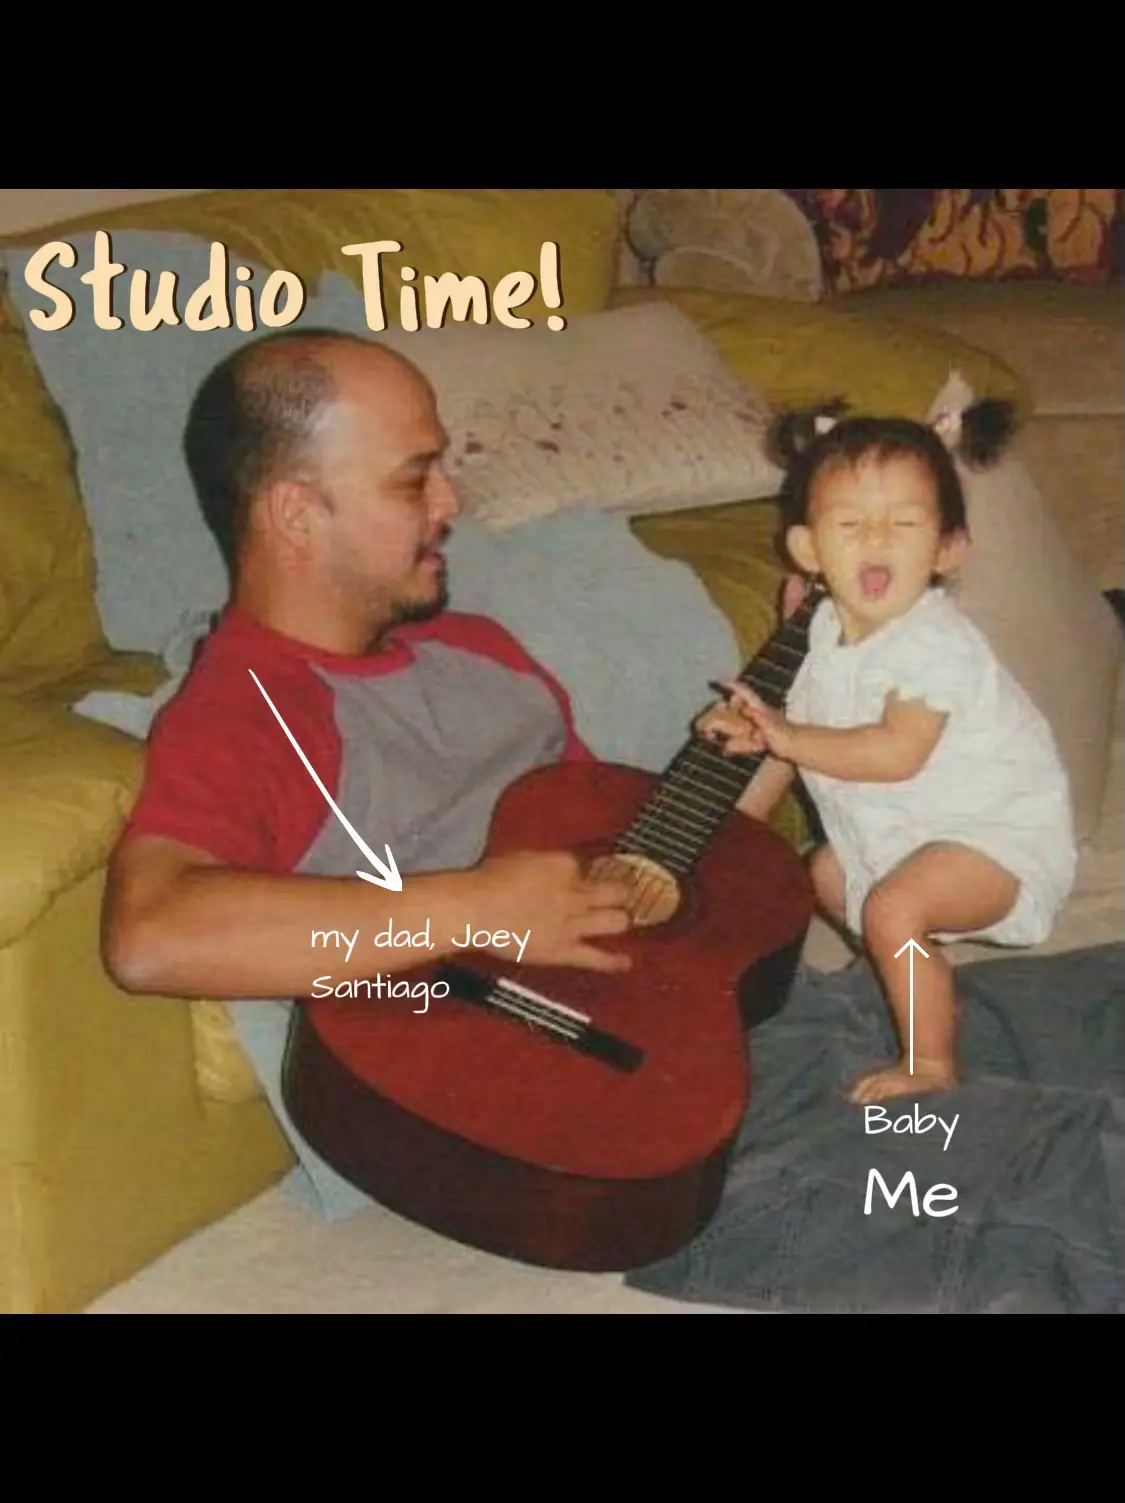  A man is playing a guitar while a baby is standing next to him.